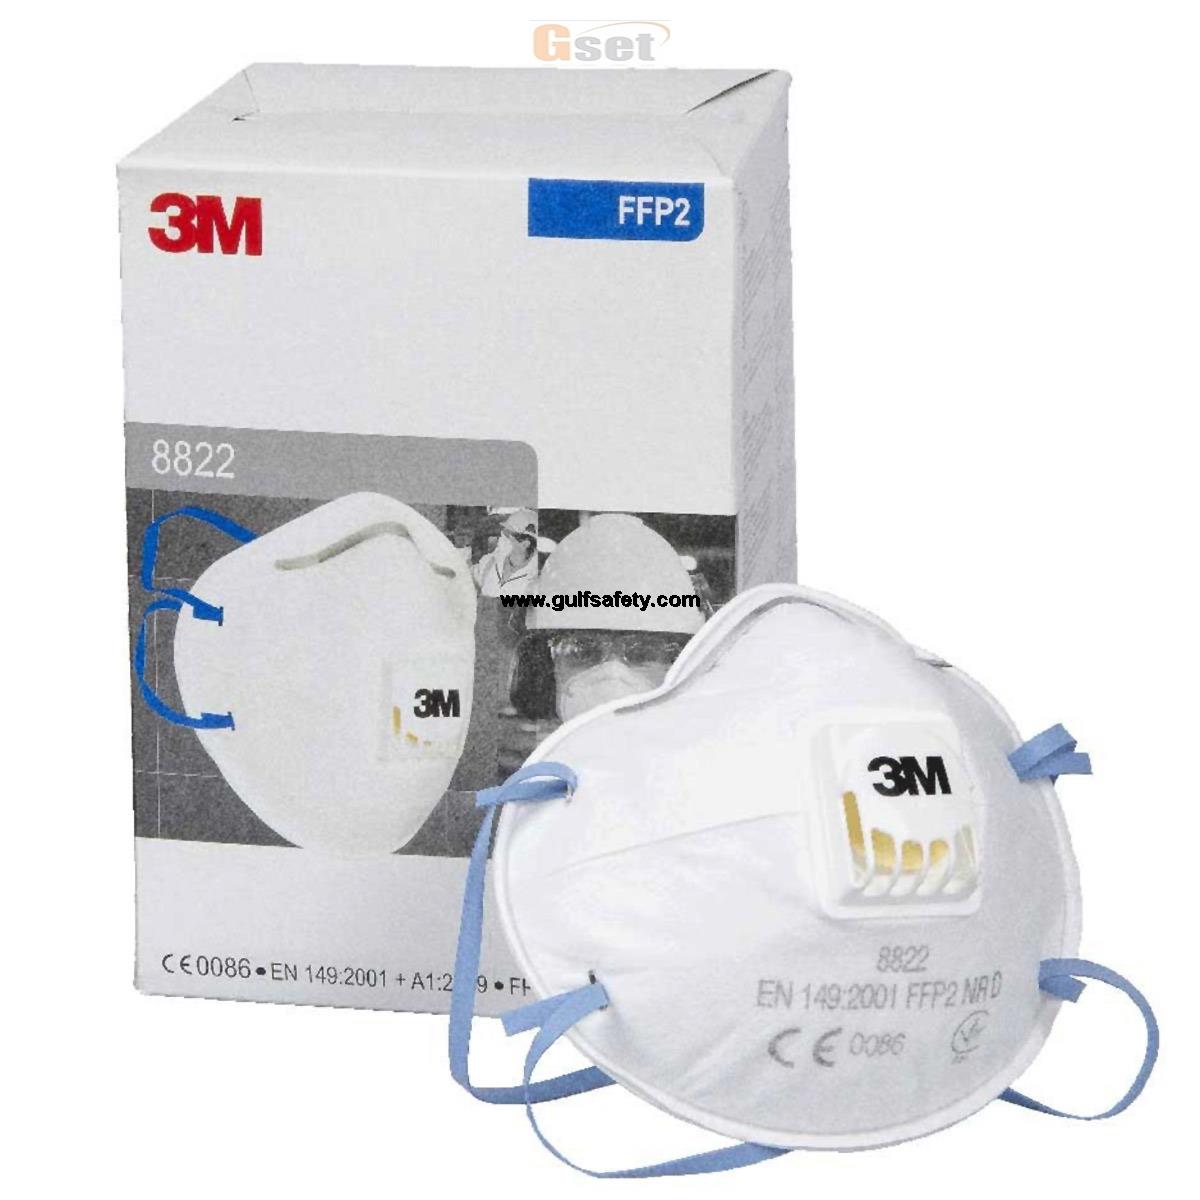 FFP2 MASK CUP WITH VALVE 3M8822